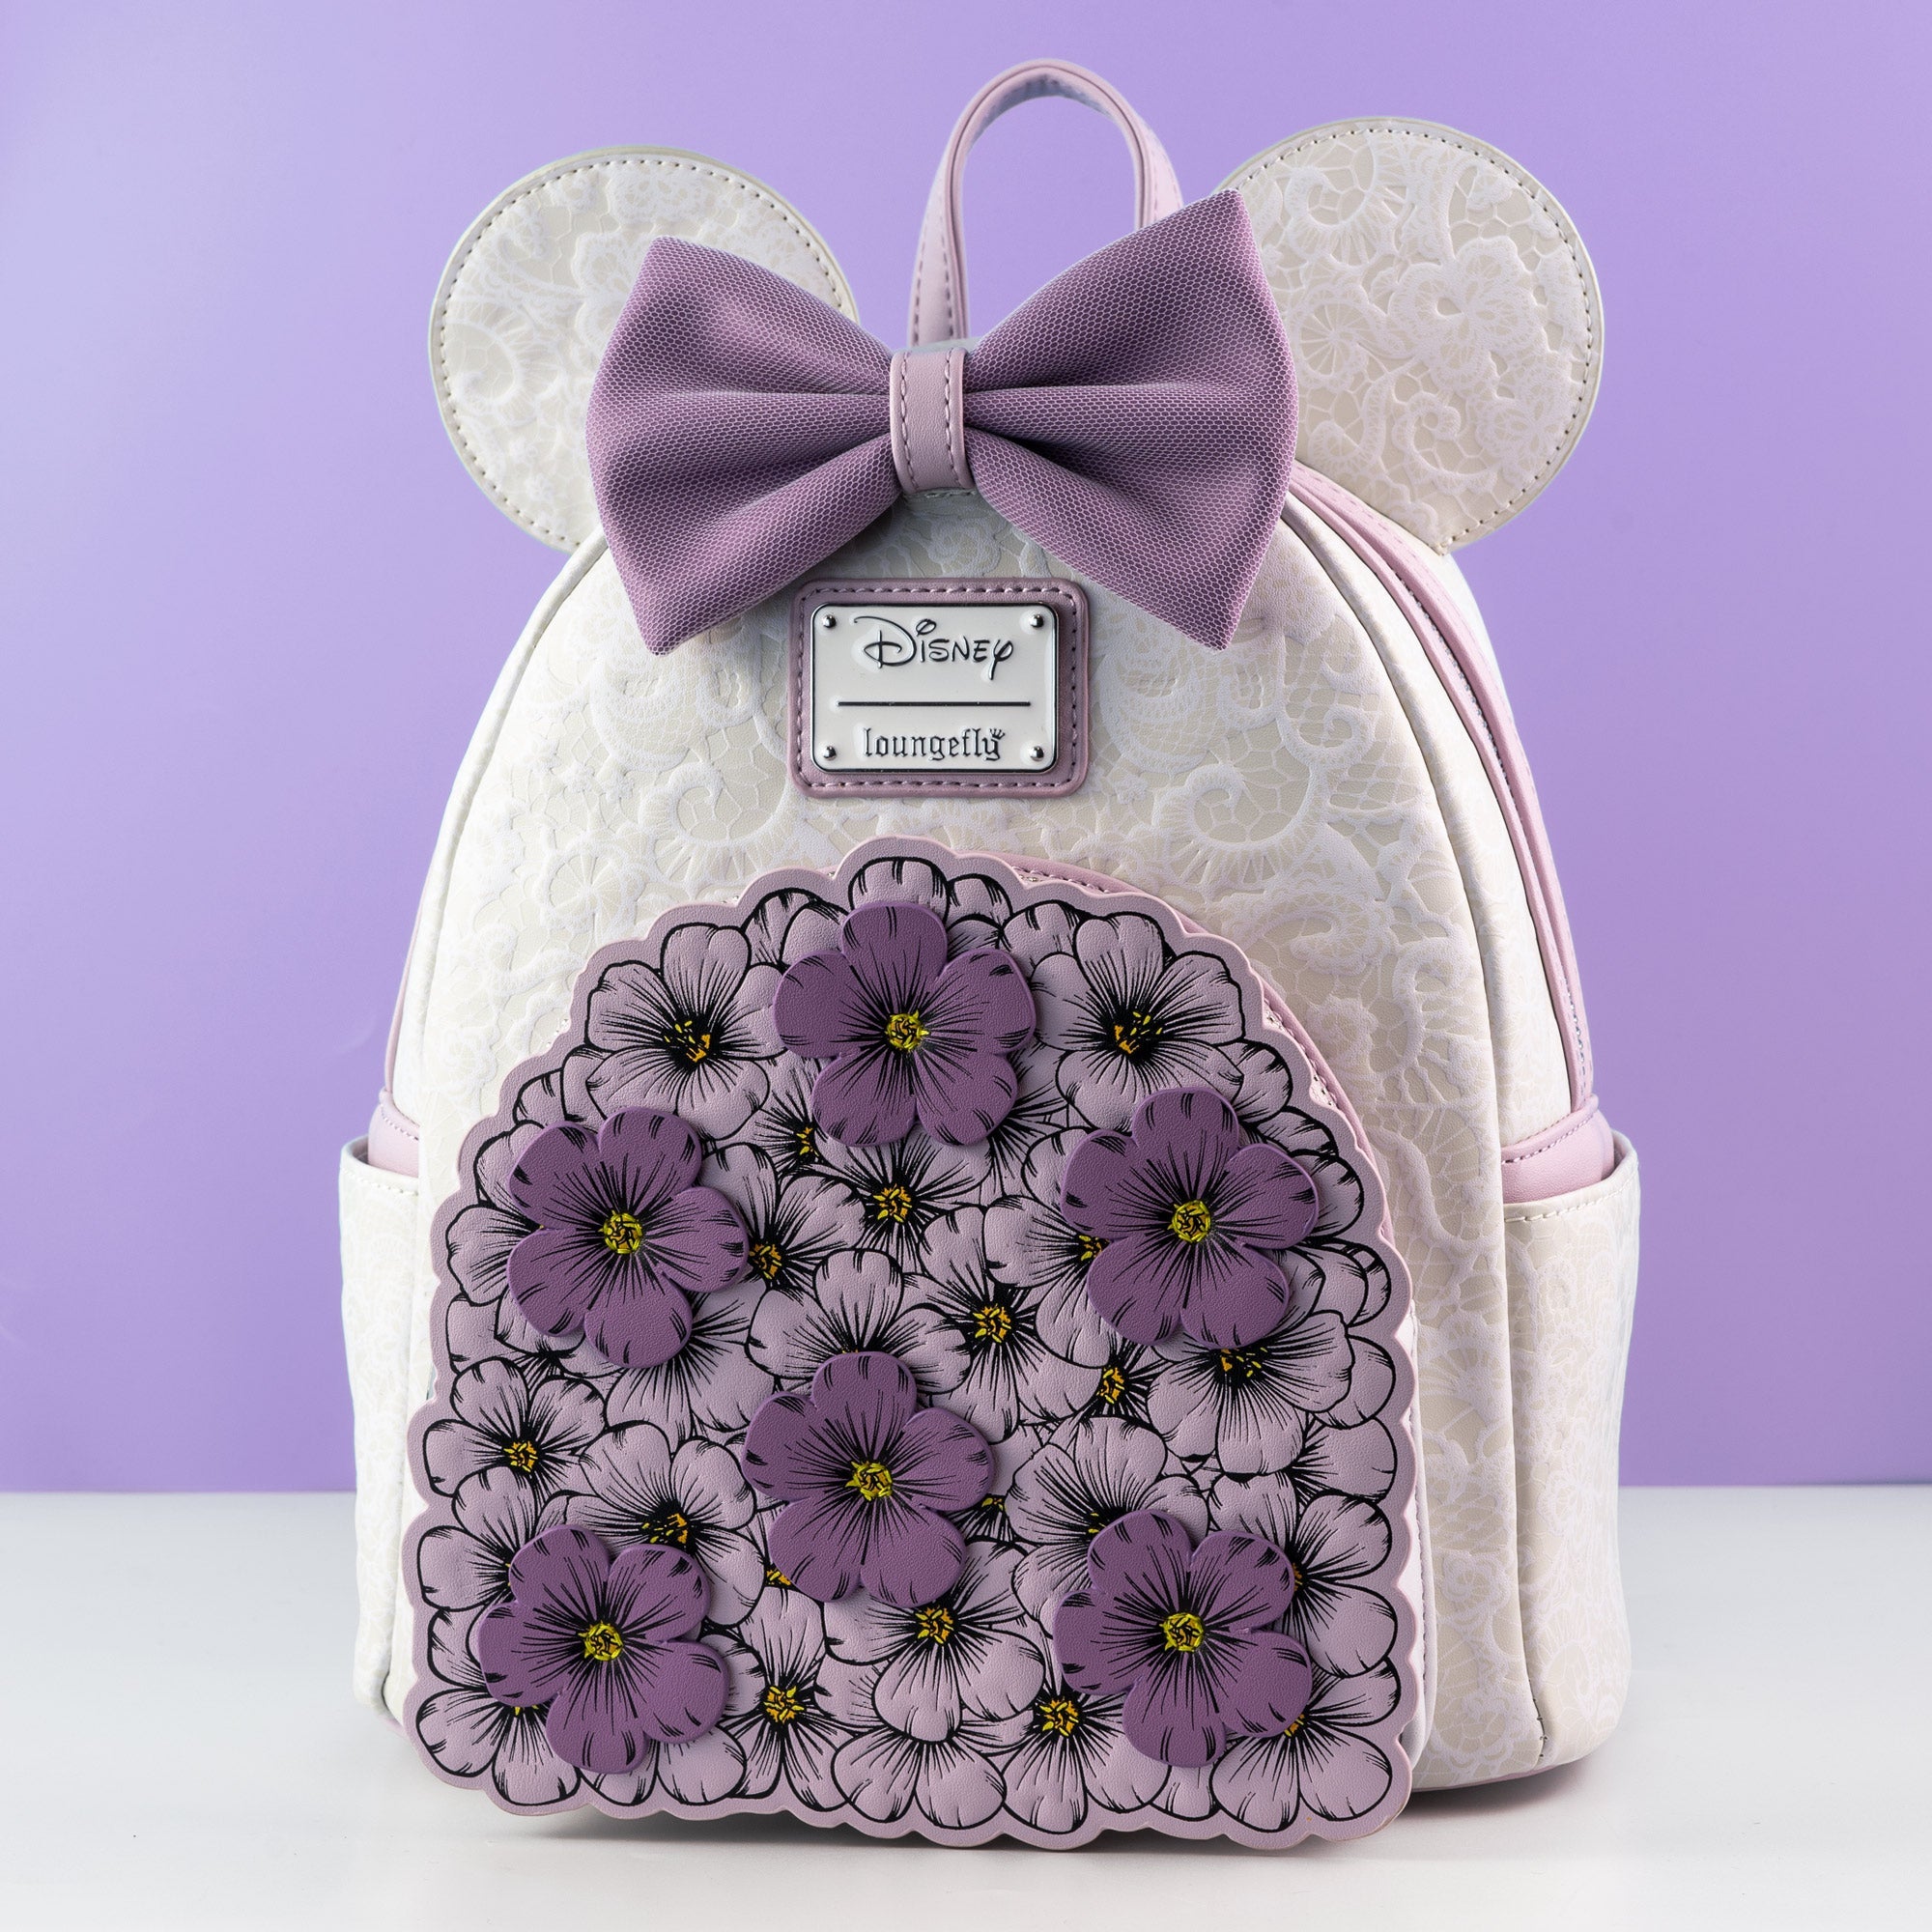 Loungefly x Disney Minnie Mouse Floral Wedding Bouquet Mini Backpack - GeekCore